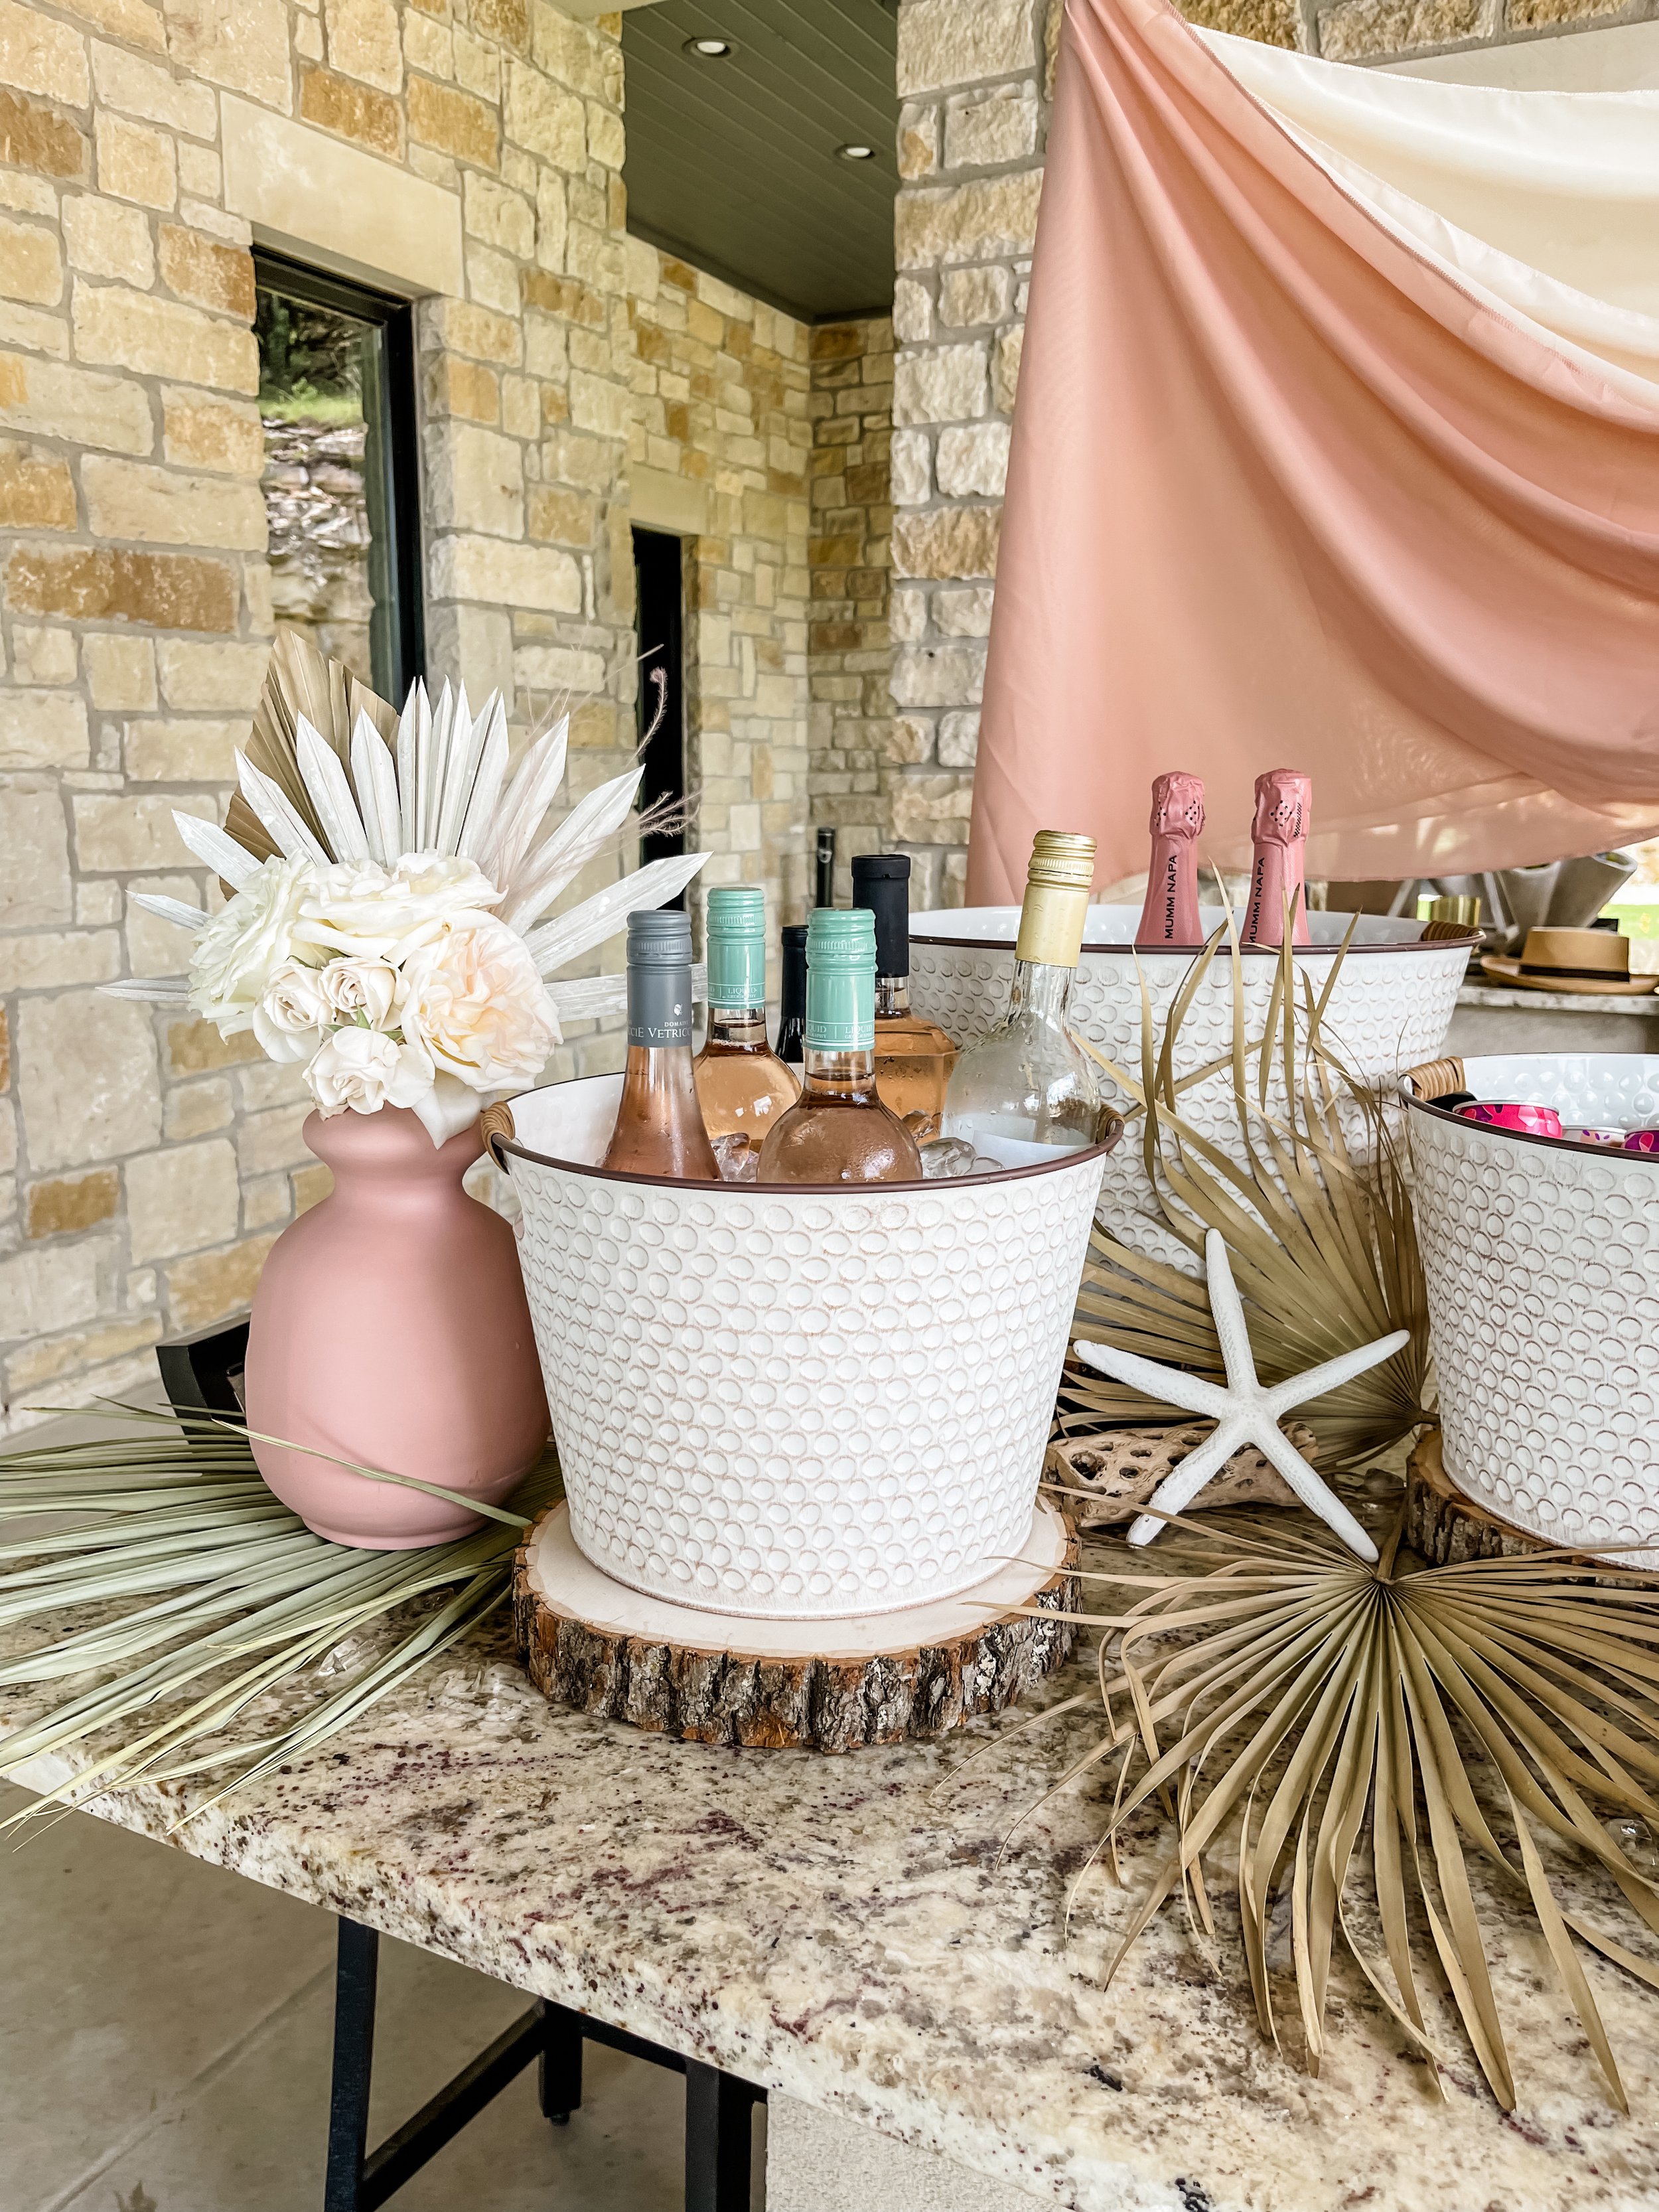  Beachy bar decor - Host a stylish and relaxed Tulum beach-inspired Baby Shower with these ideas for food bar, drink station, picnic style seating, decor and more from event designer Carolina of MINT Event Design in Austin, Texas. Get details and ton